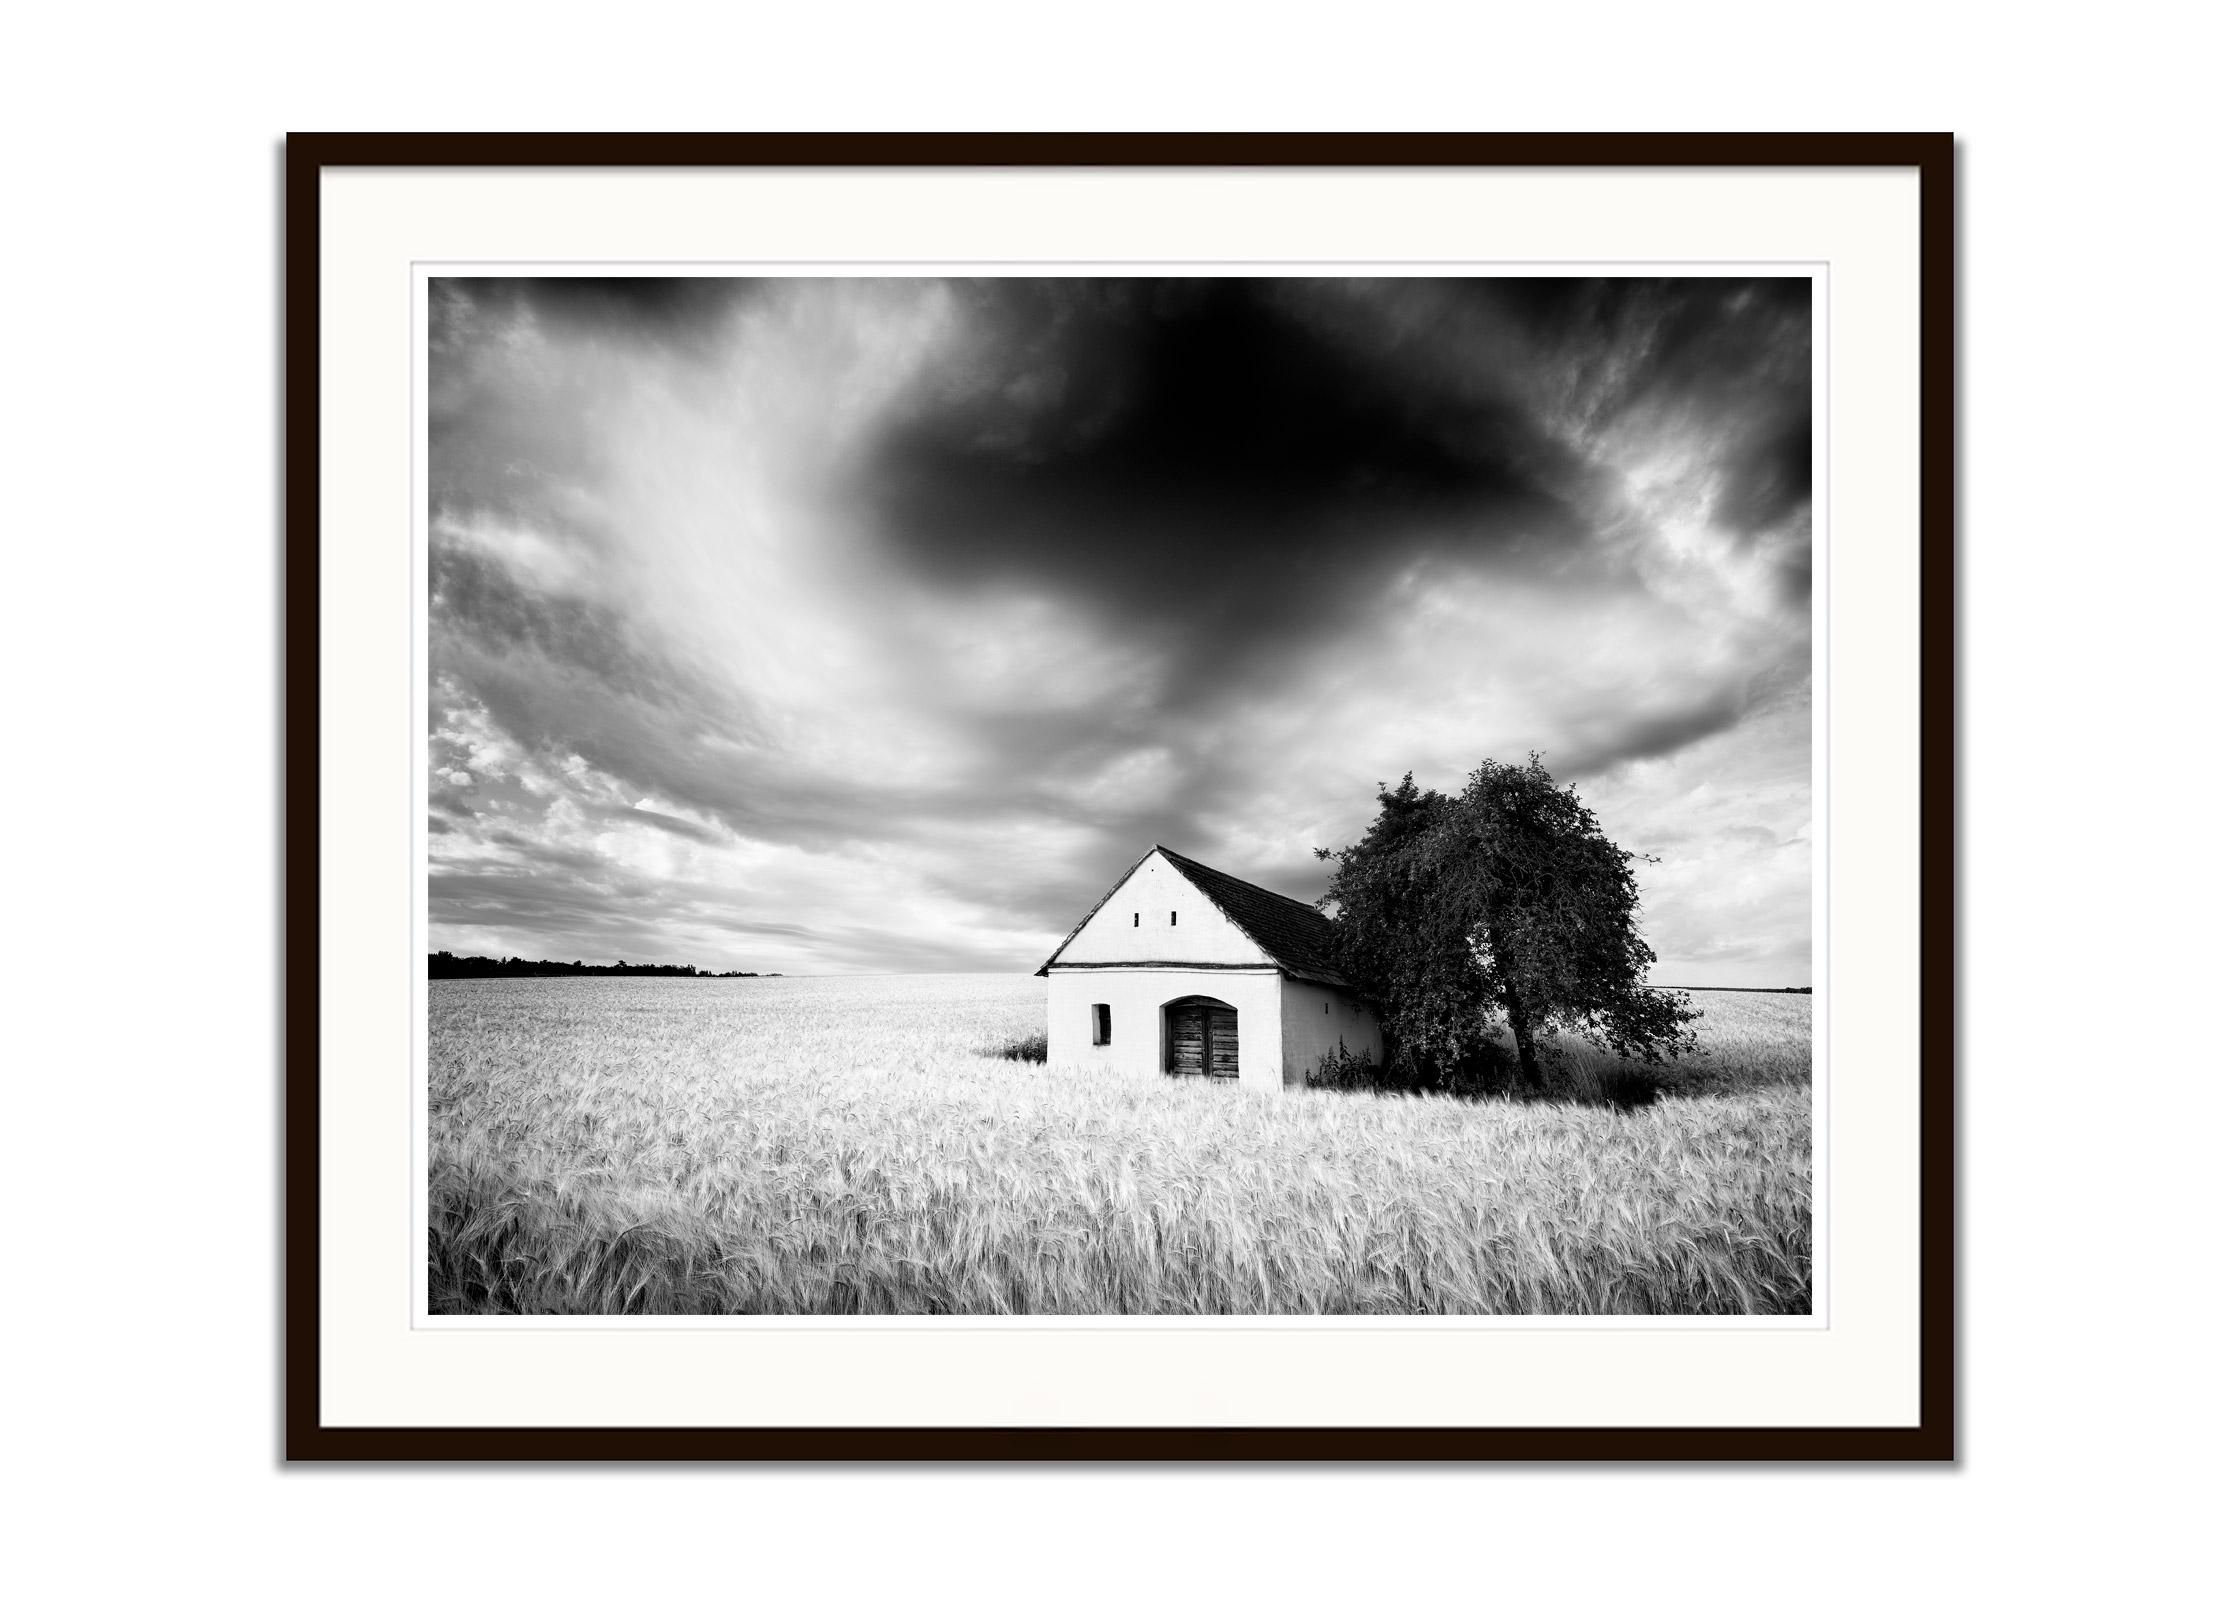 Wine Press House, cornfield, cloudy, black and white photography, landscape - Contemporary Photograph by Gerald Berghammer